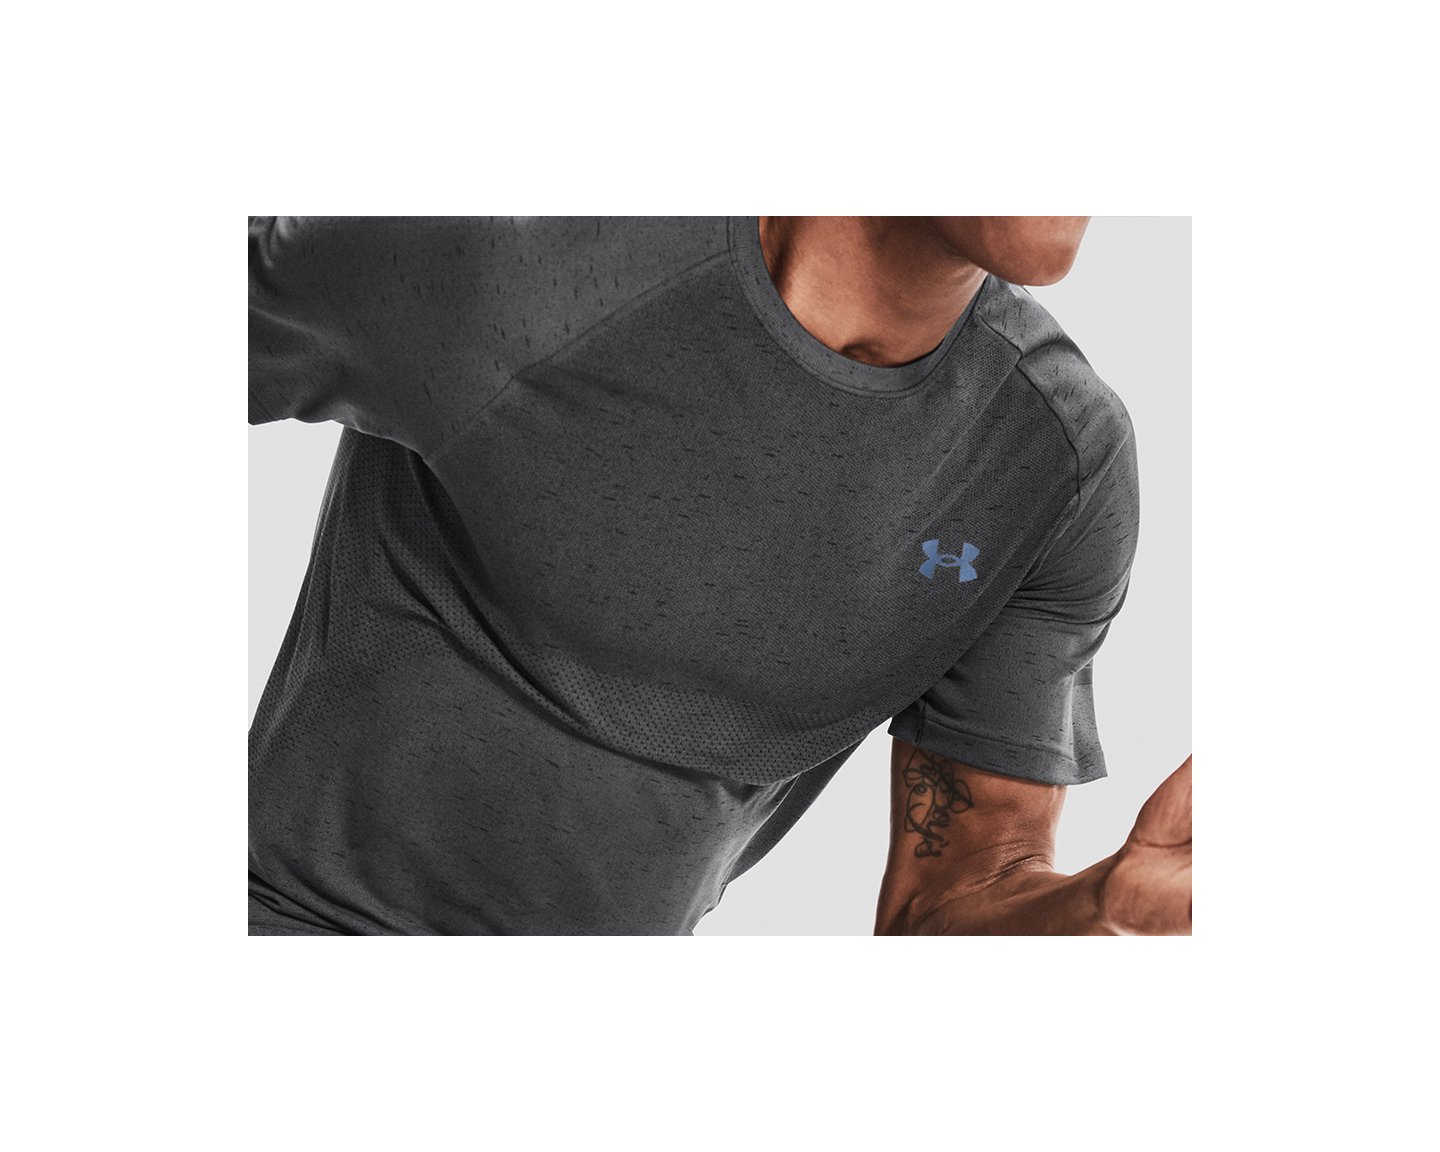 UNDER ARMOUR TRAINING Under Armour SEAMLESS WAVE - T-Shirt - Men's - pink -  Private Sport Shop